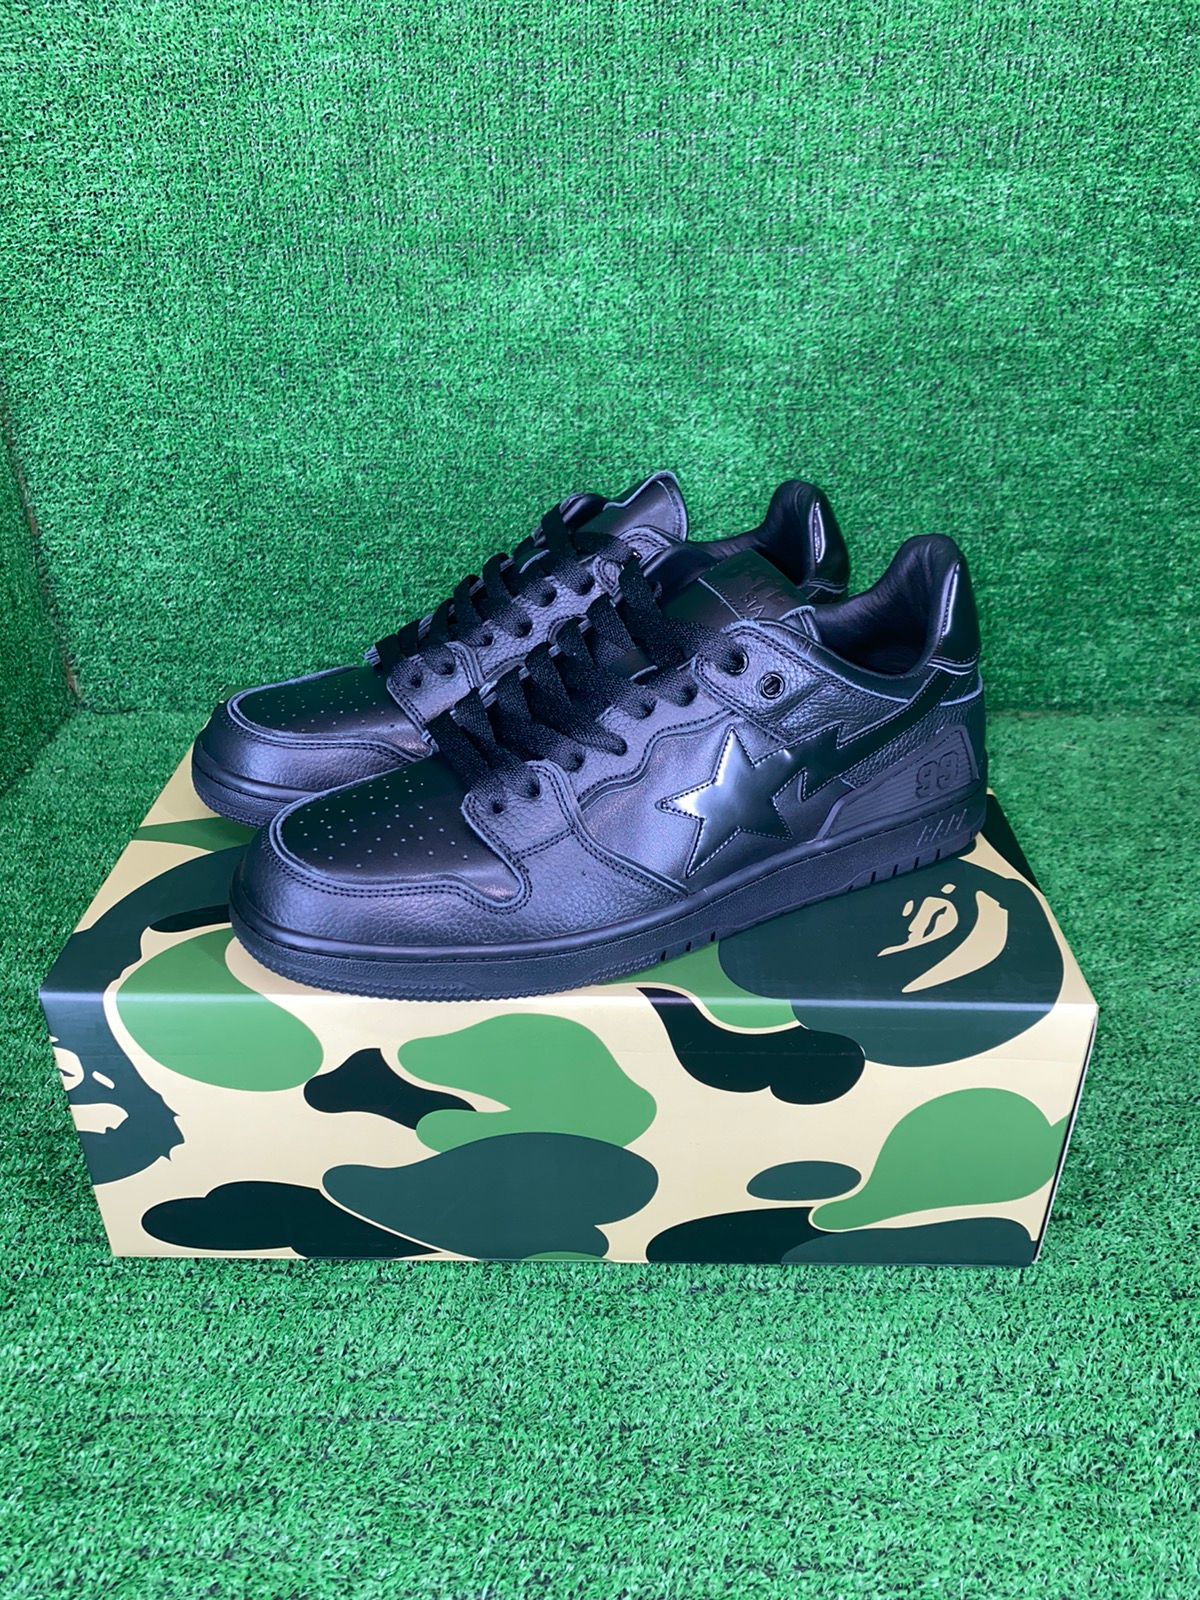 Pre-owned Bape Sk8 Sta 3 Black Size 10 Shoes